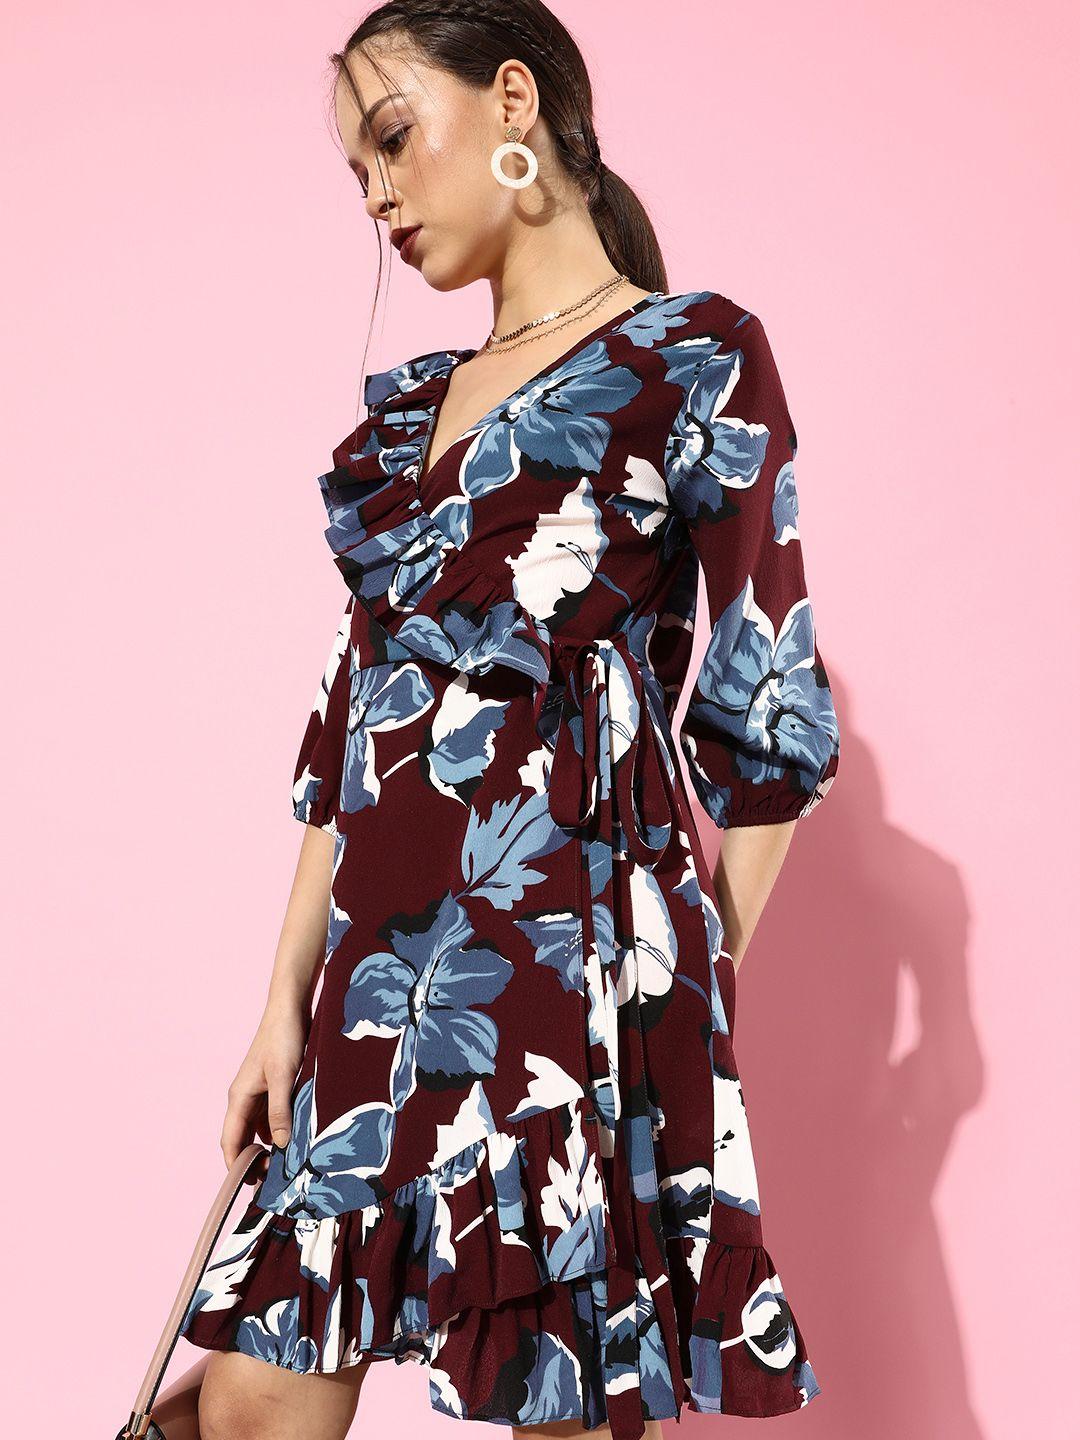 style quotient maroon floral ruffled dress